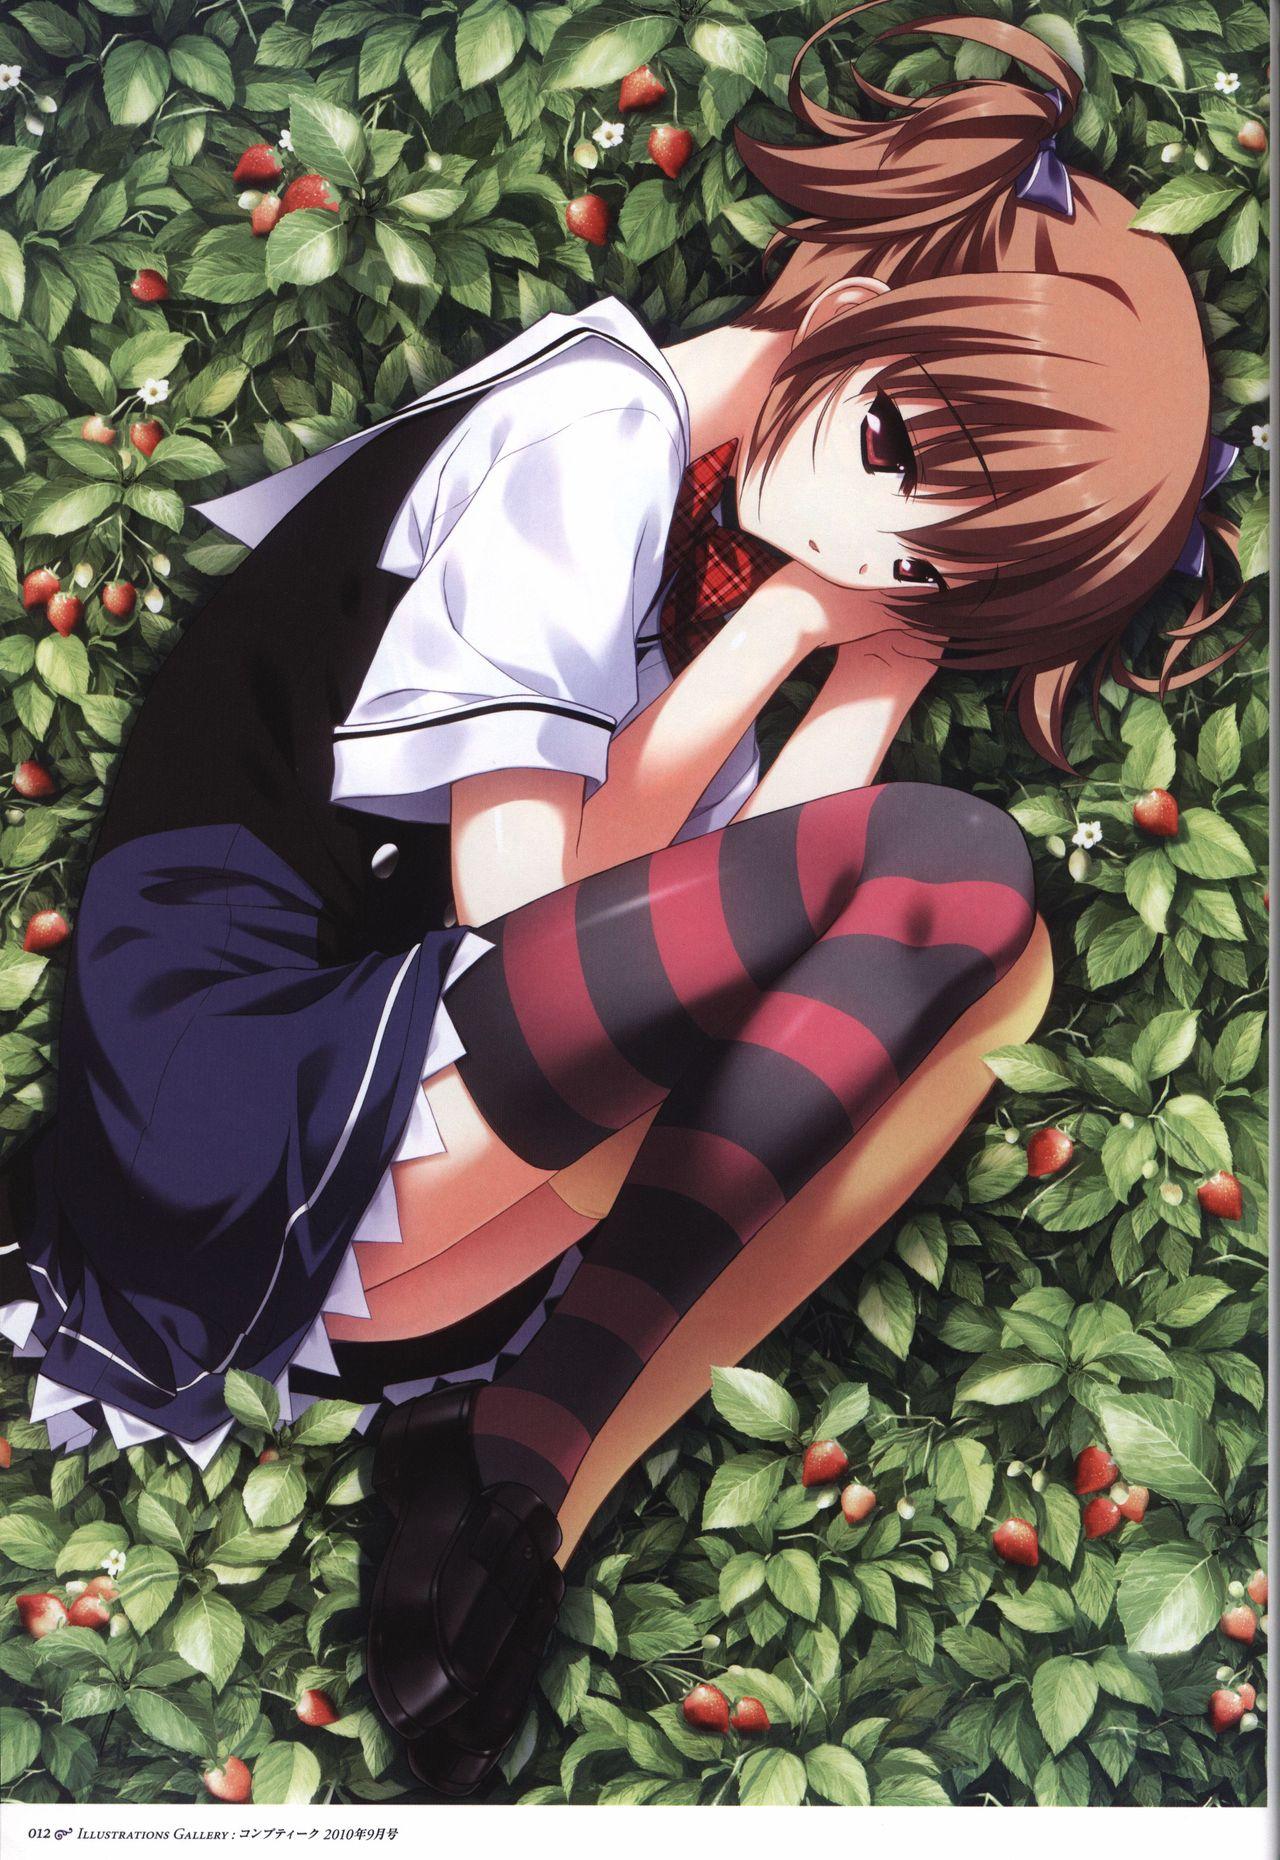 The Fruit of Grisaia Visual FanBook 12